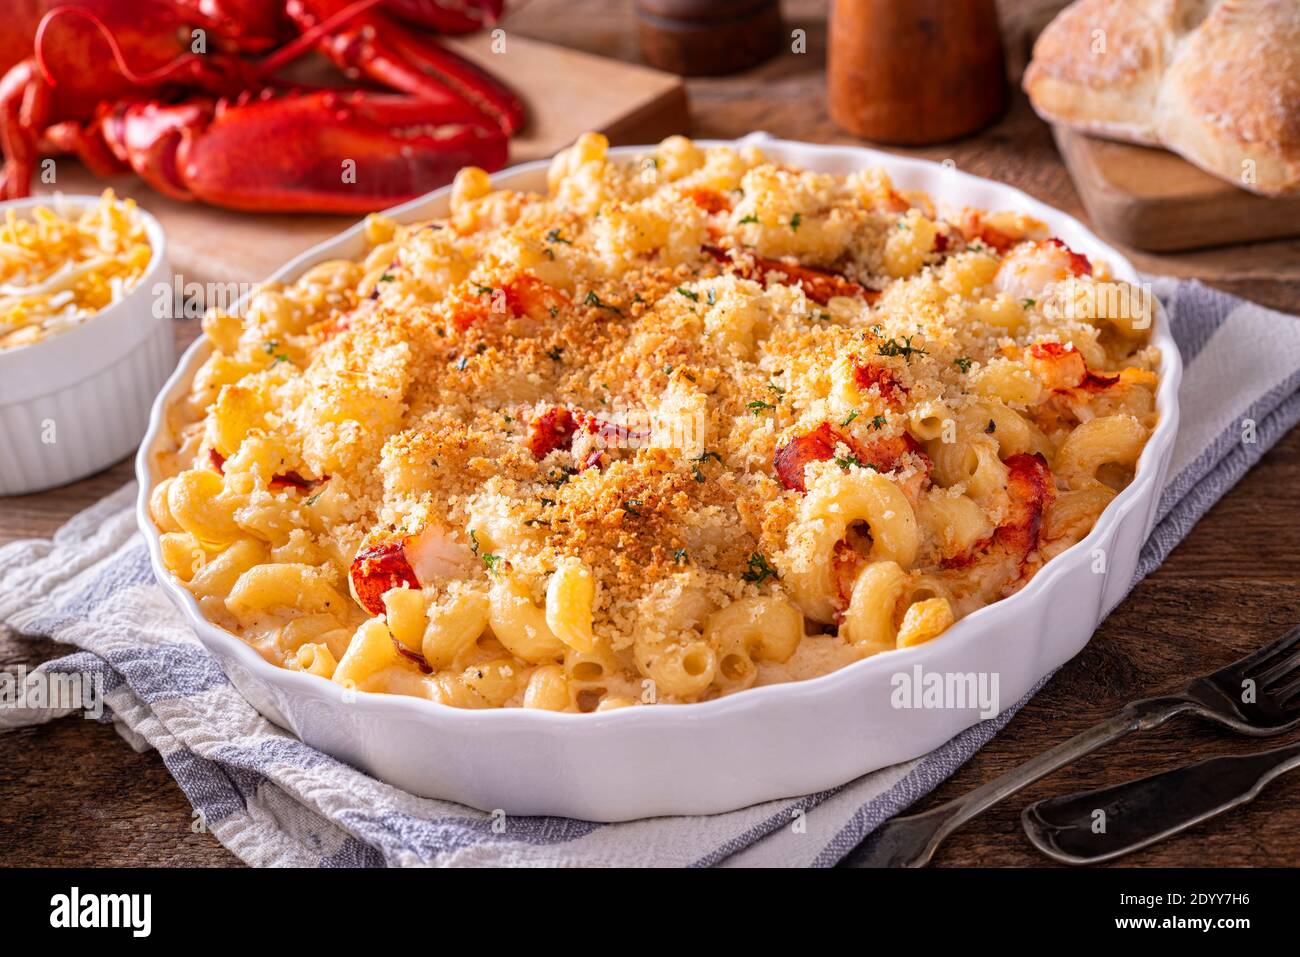 A delicious lobster macaroni and cheese casserole on a rustic wood table top. Stock Photo